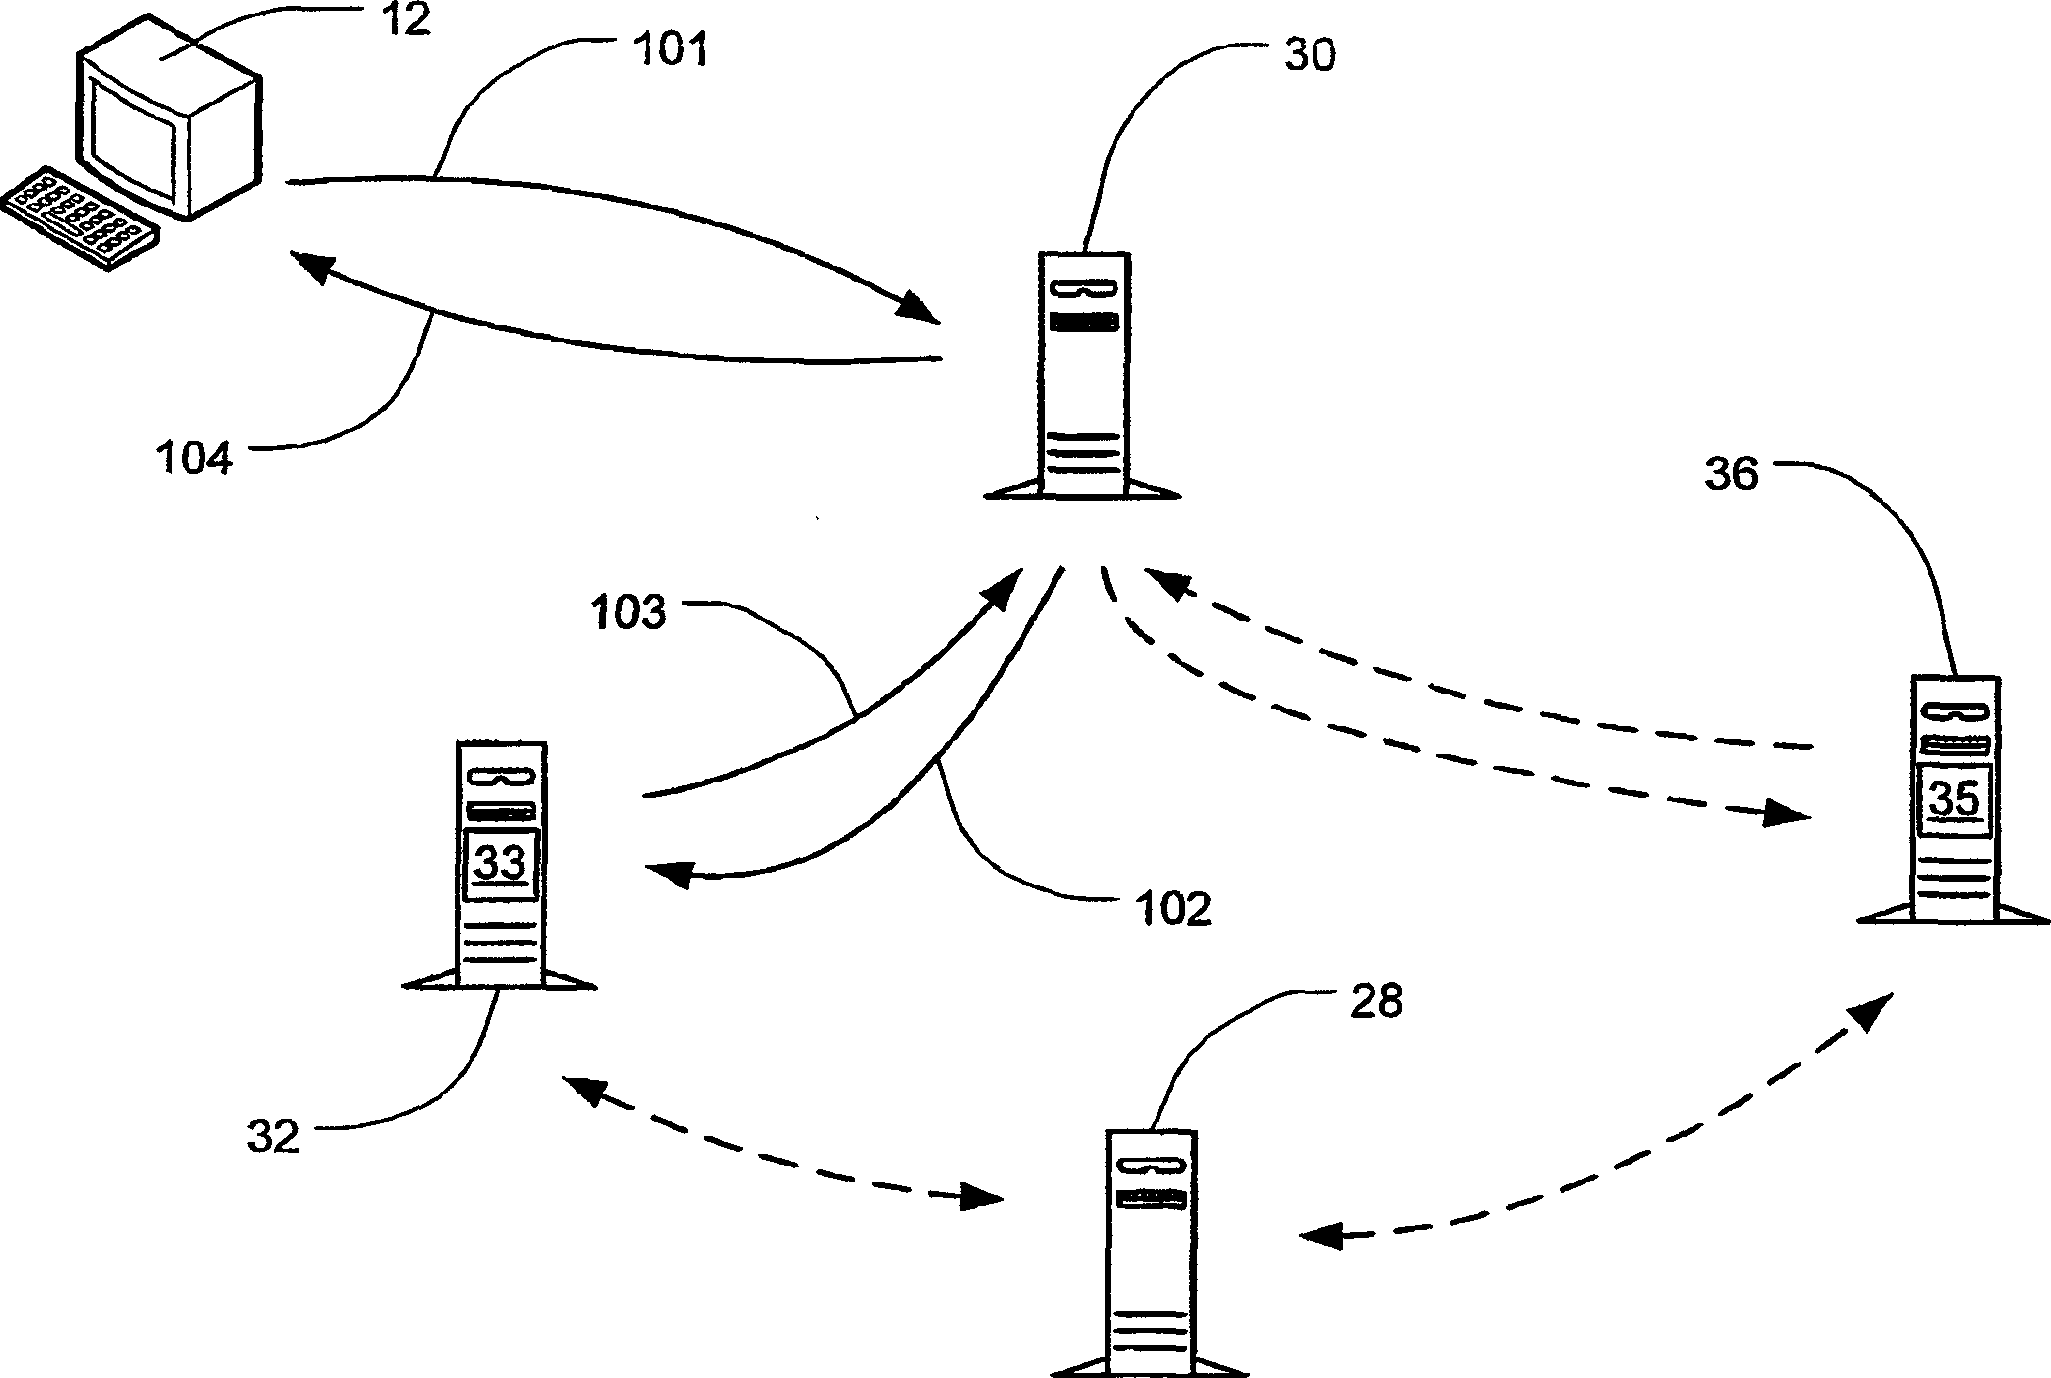 Authentication system for networked computer applications